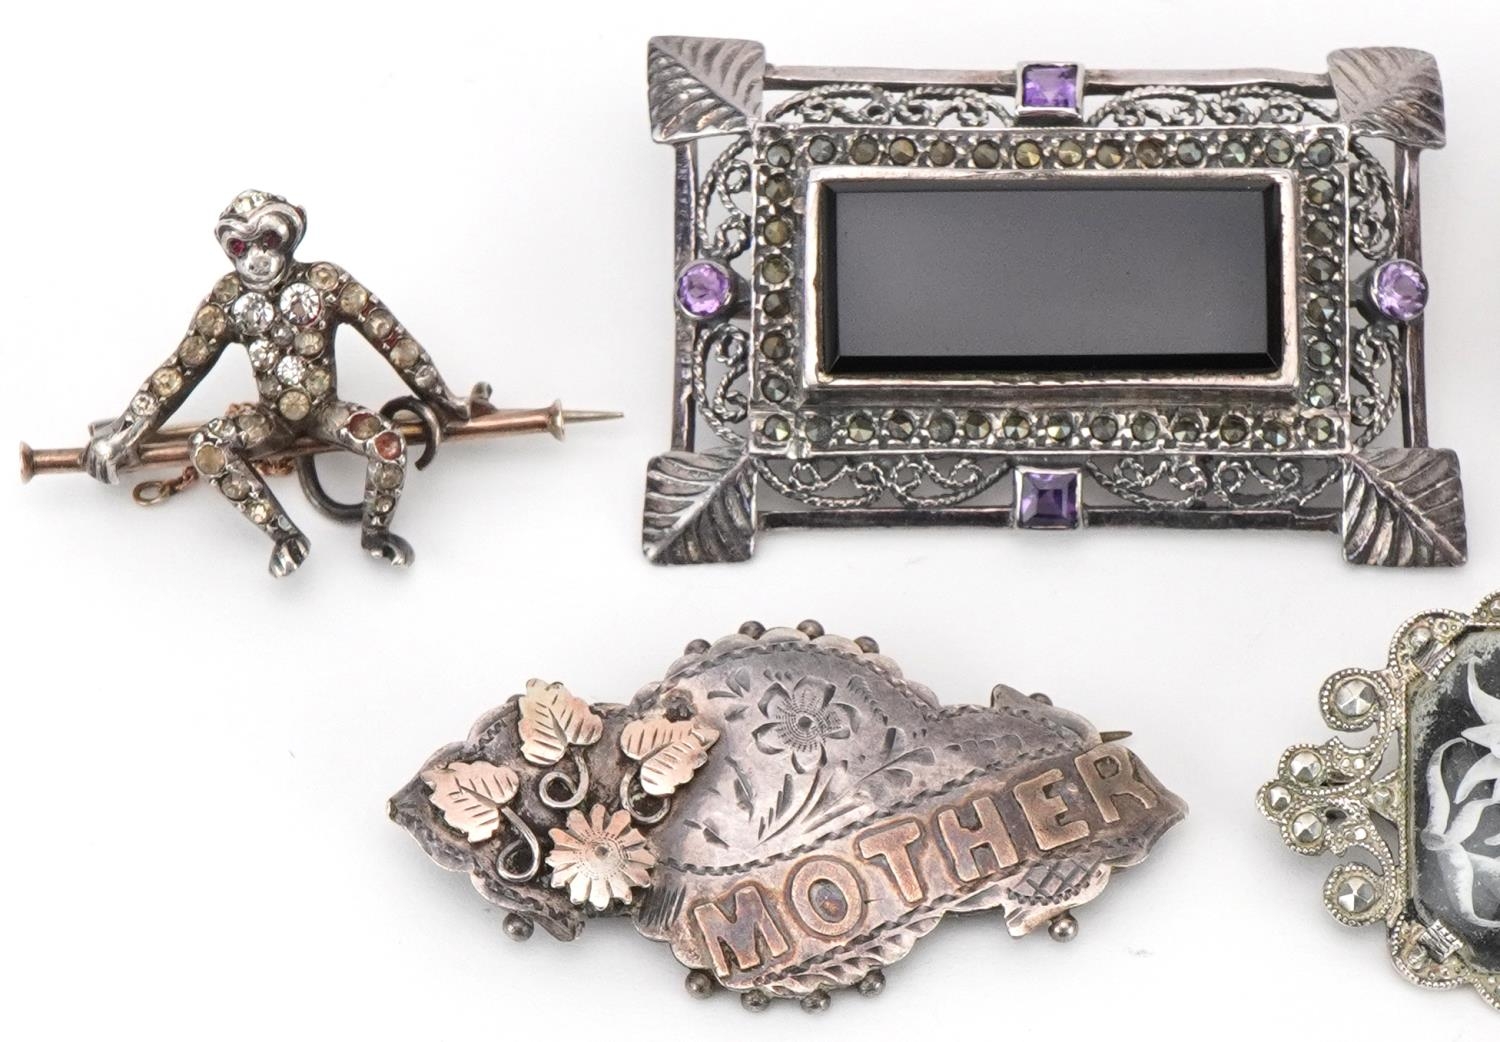 Victorian and later silver and white metal jewellery including an aesthetic 'Mother' brooch, - Image 2 of 5